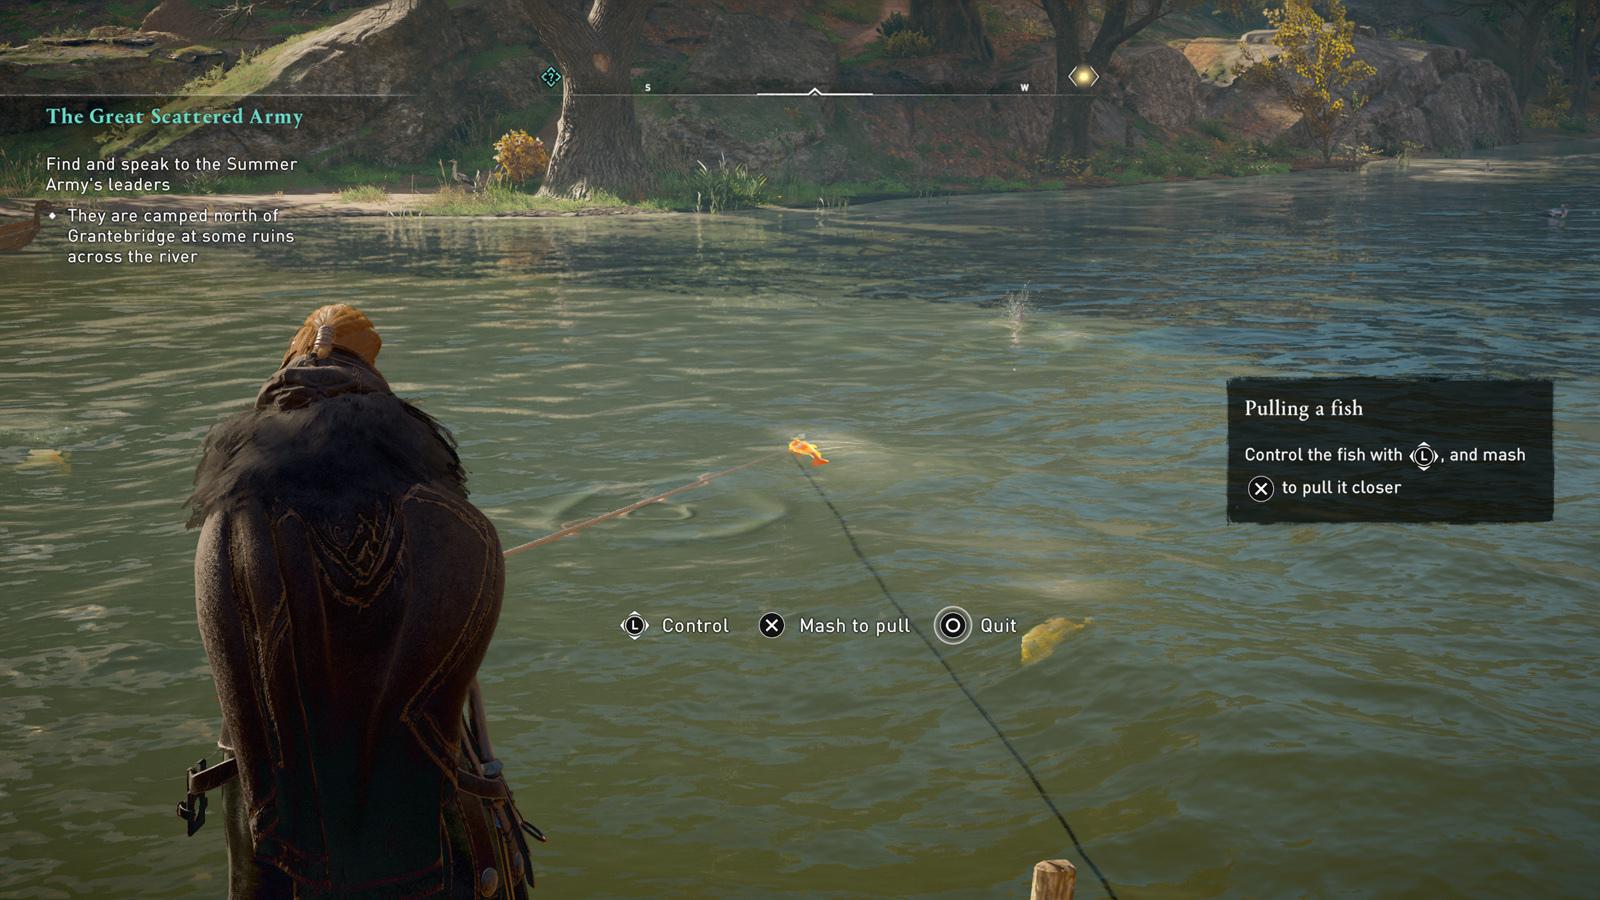 Fishing in Assassin's Creed Valhalla